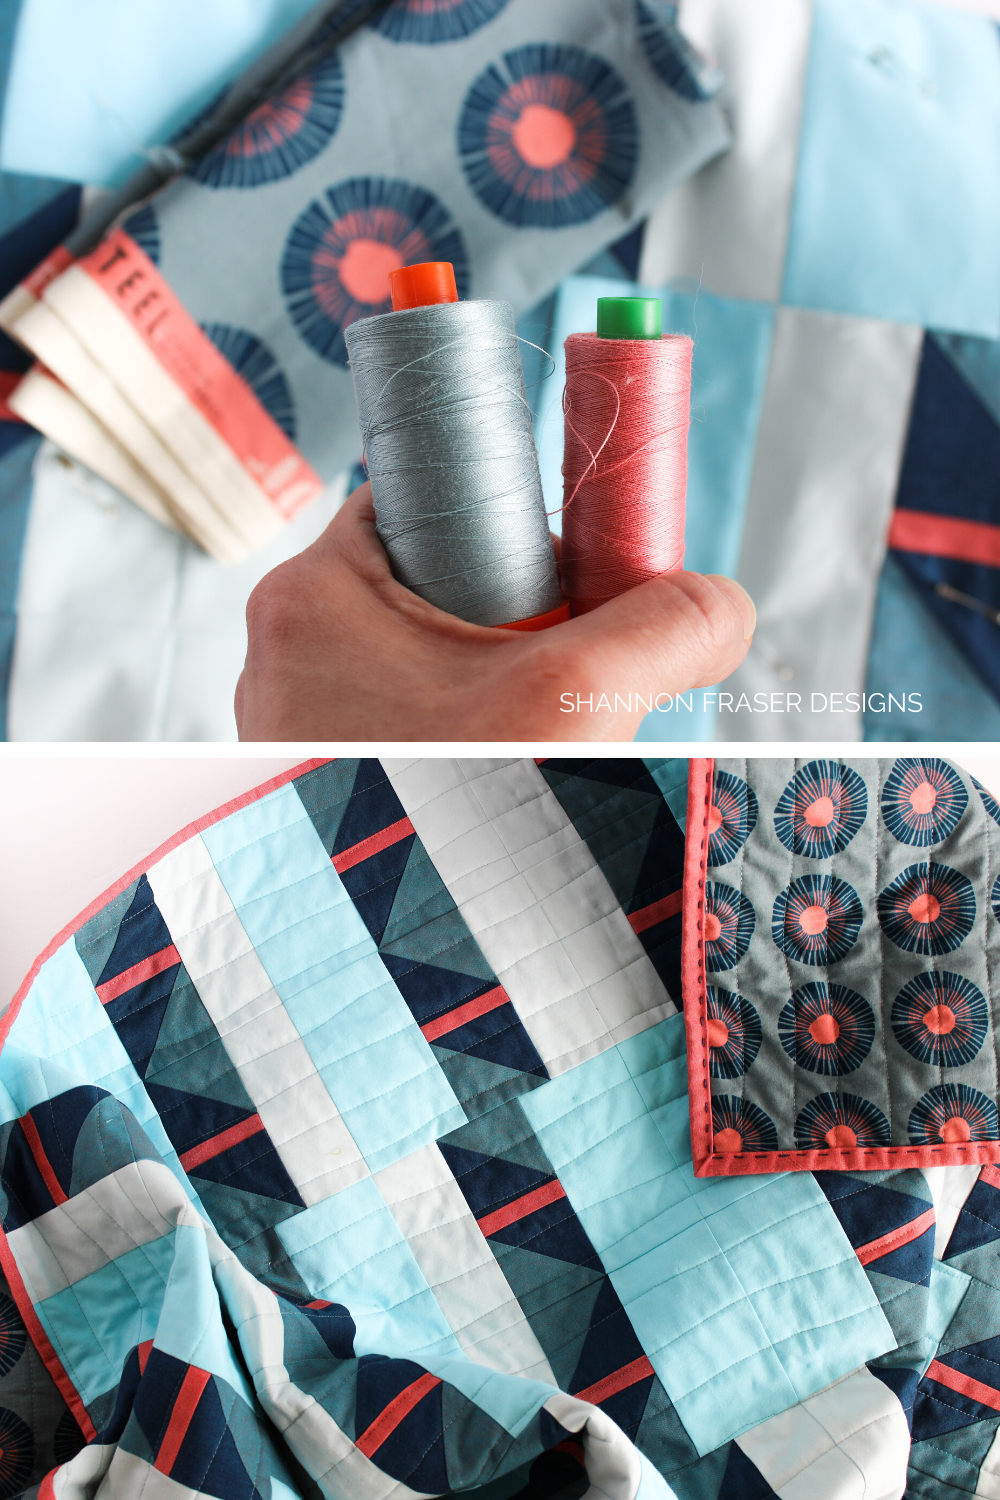 Aurifil Thread I considered using for machine quilting my Shattered Star blue and coral Artisan Cotton quilt featuring organic wavy line quilting | Modern quilt pattern | Shannon Fraser Designs #organicwavylinequilting